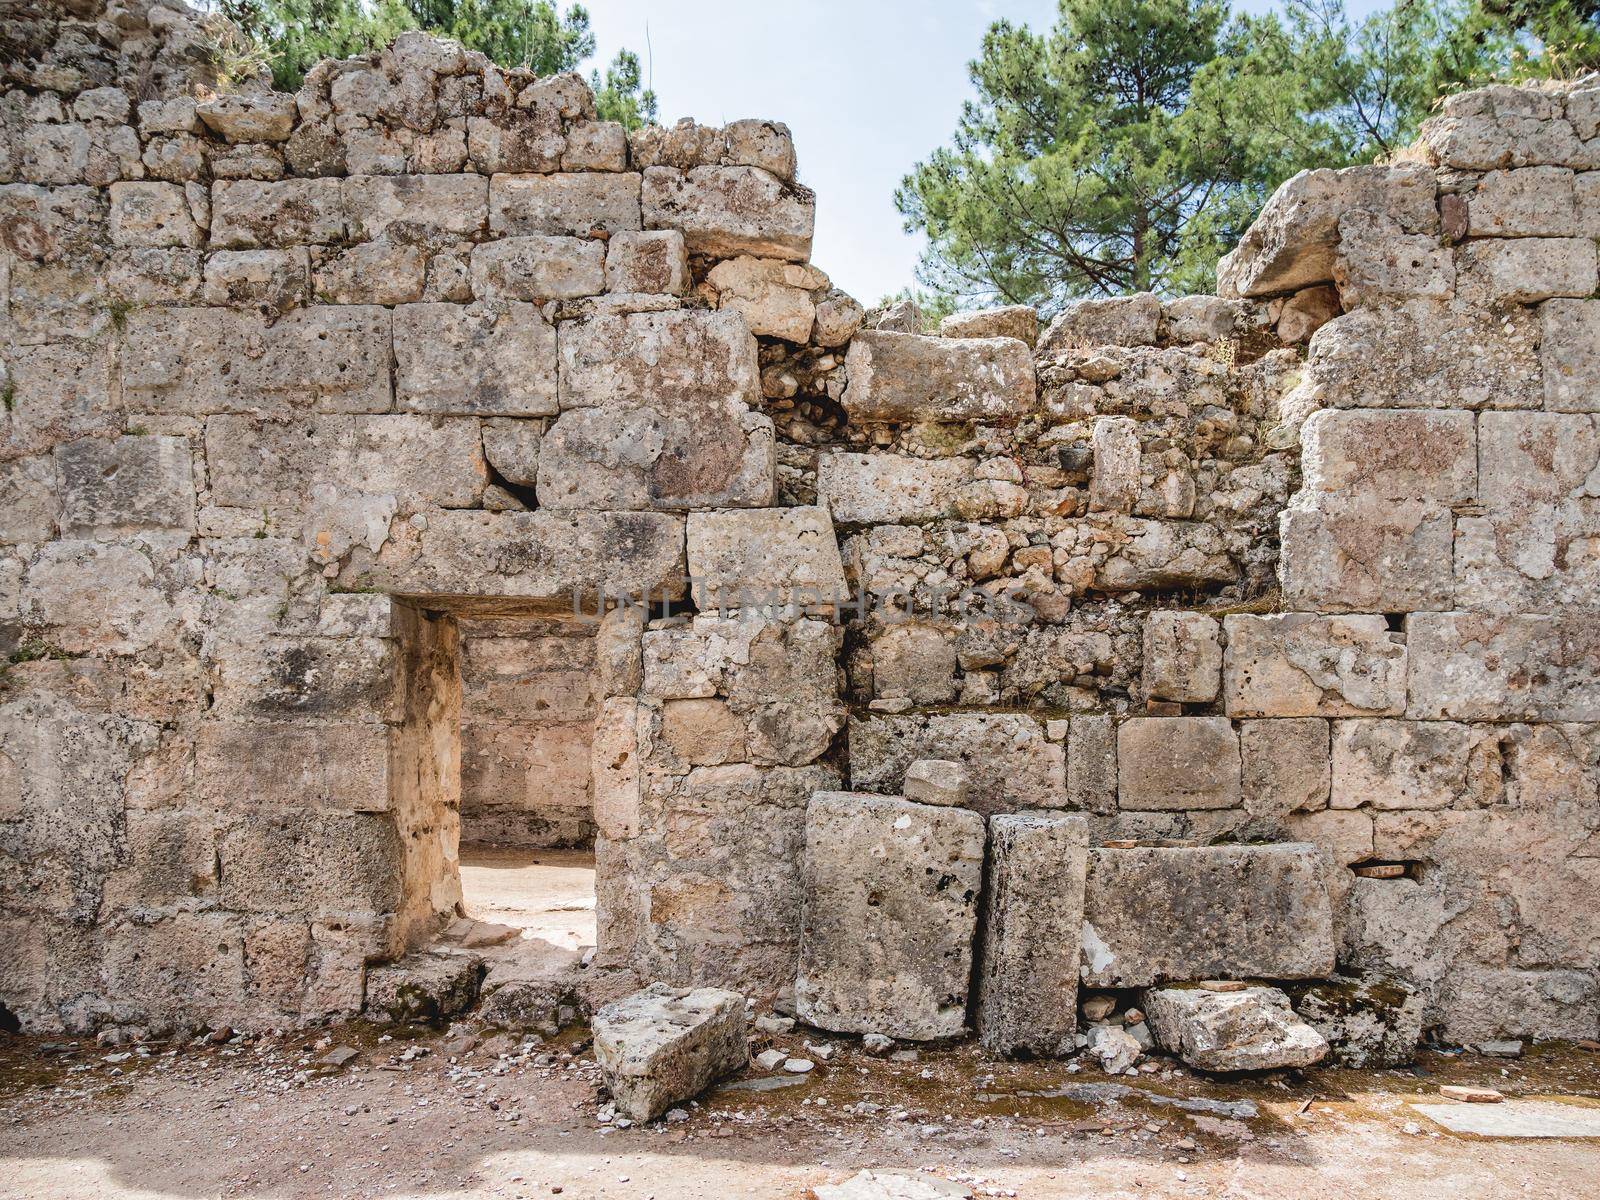 Ruins of ancient city Phaselis. Stones of damaged buildings. Architectural landmark of Turkey.